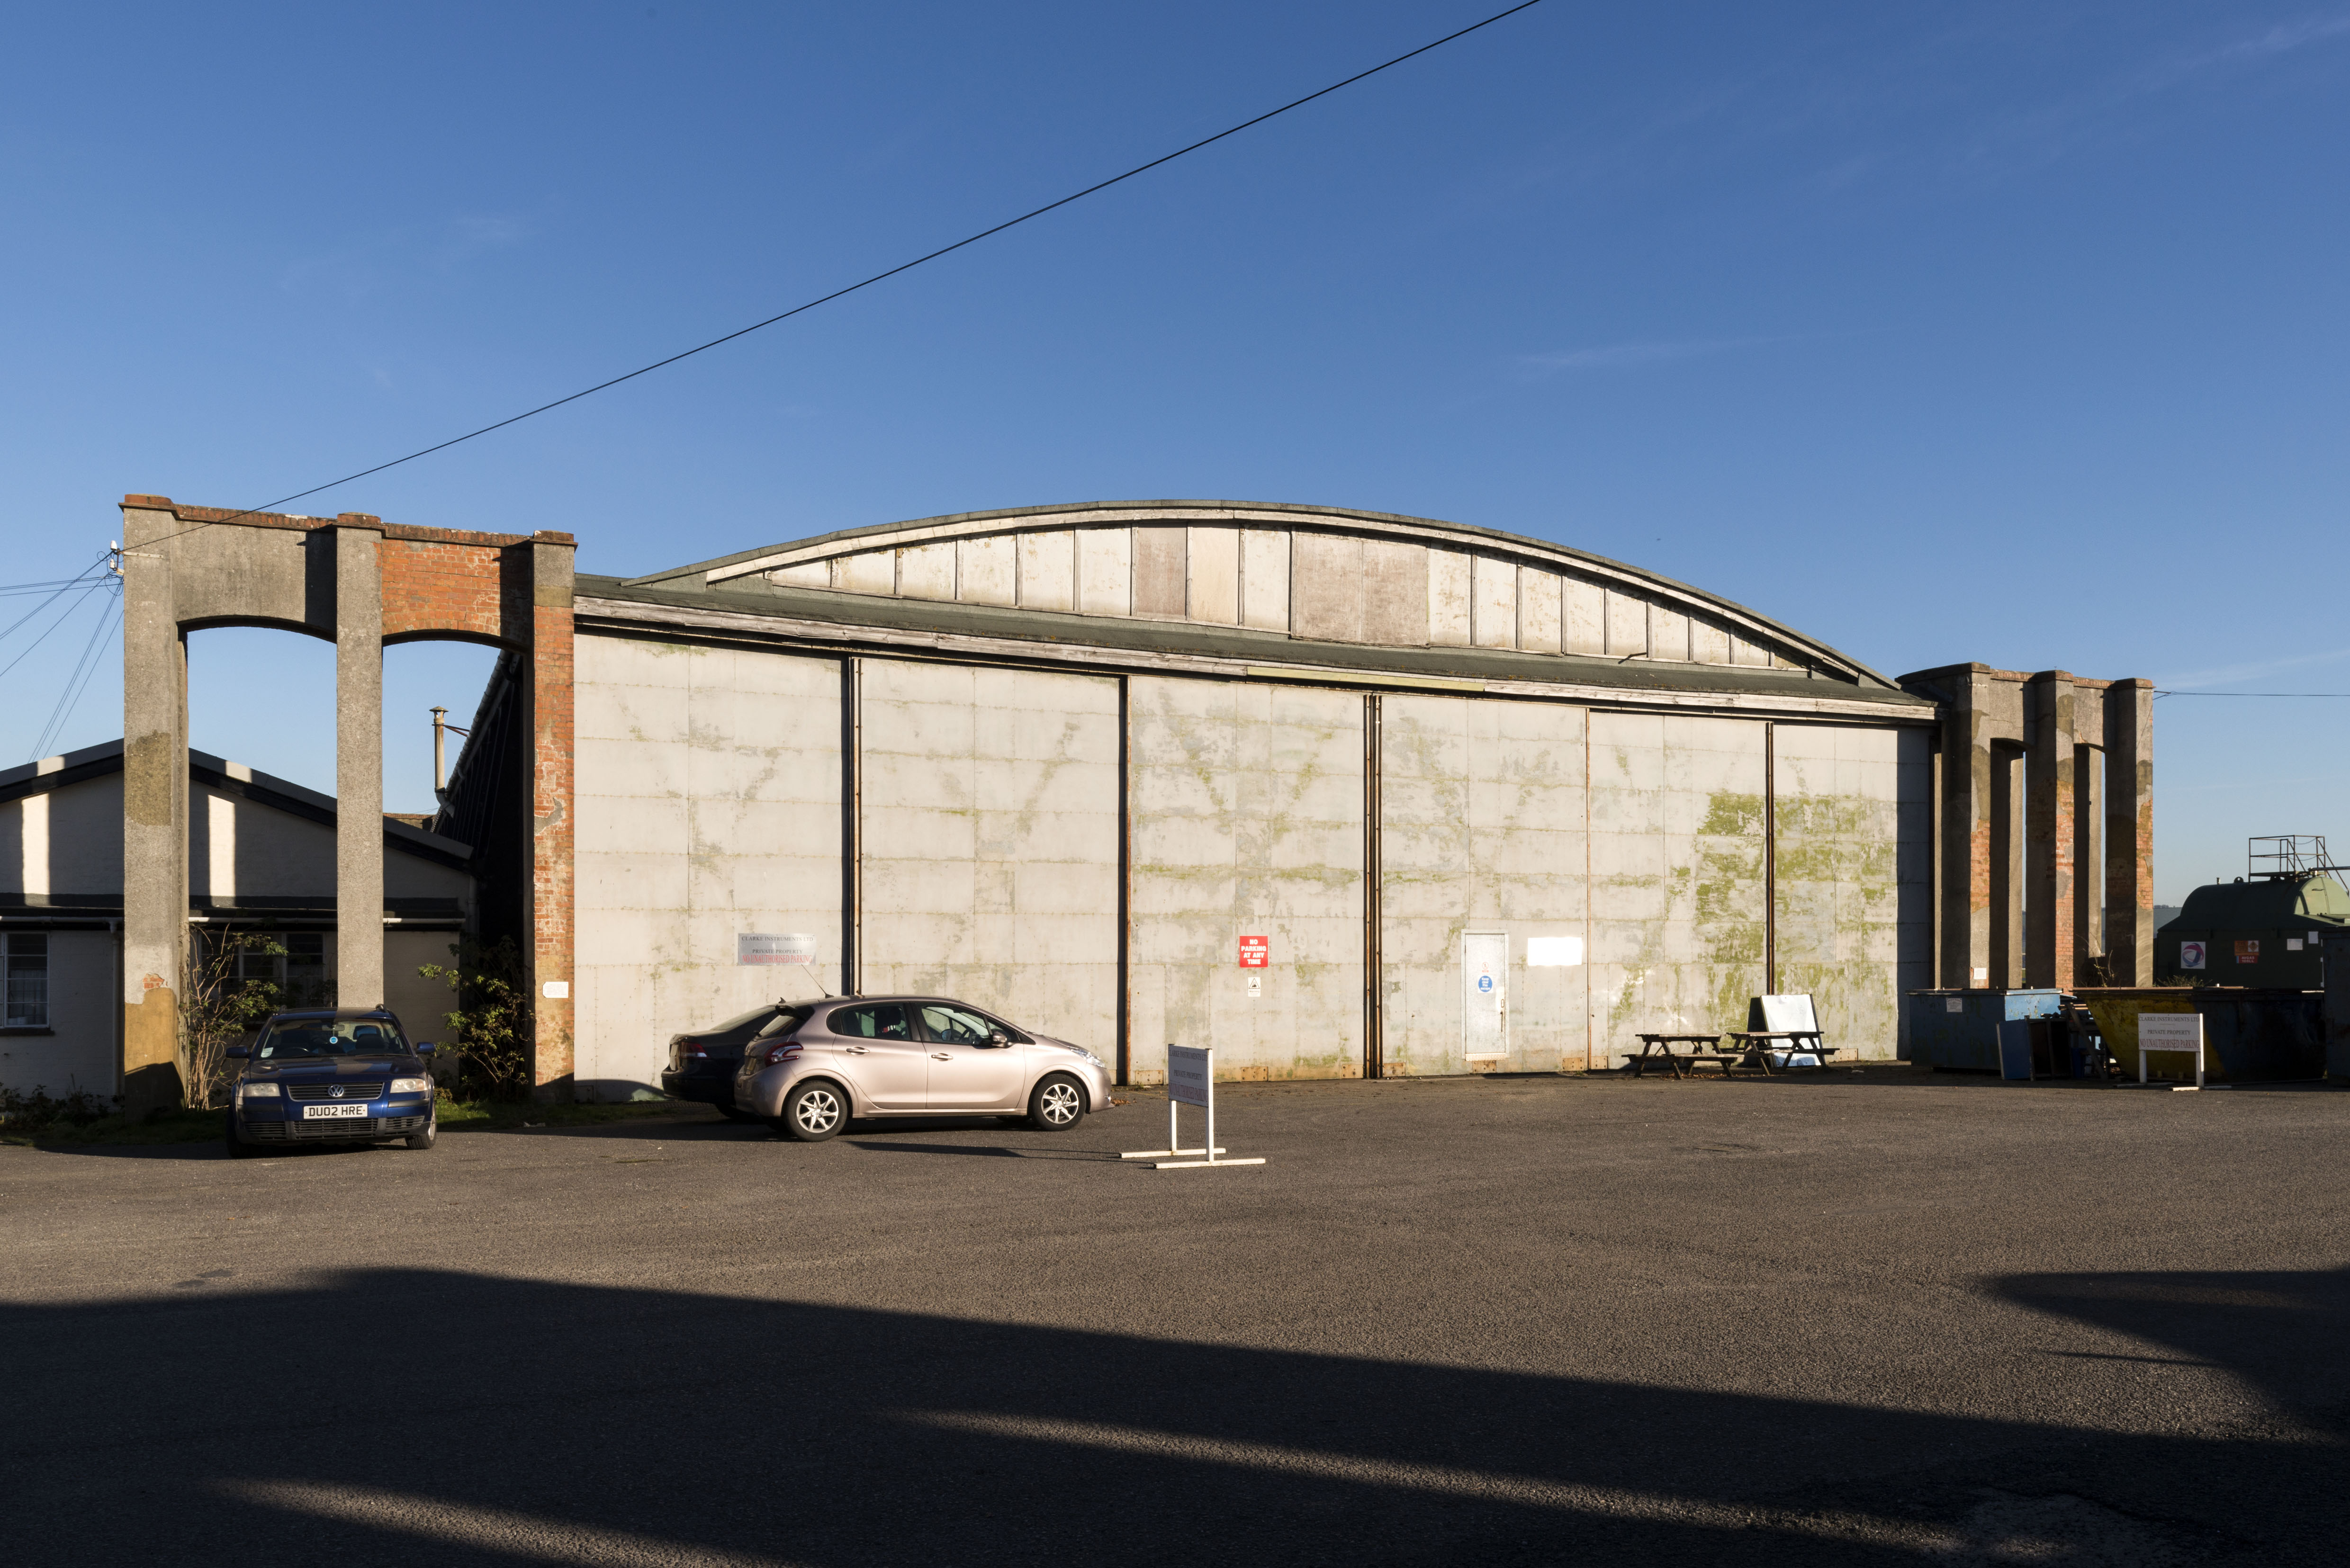 Image of the exterior of a historic aircraft hangar, a large single story building